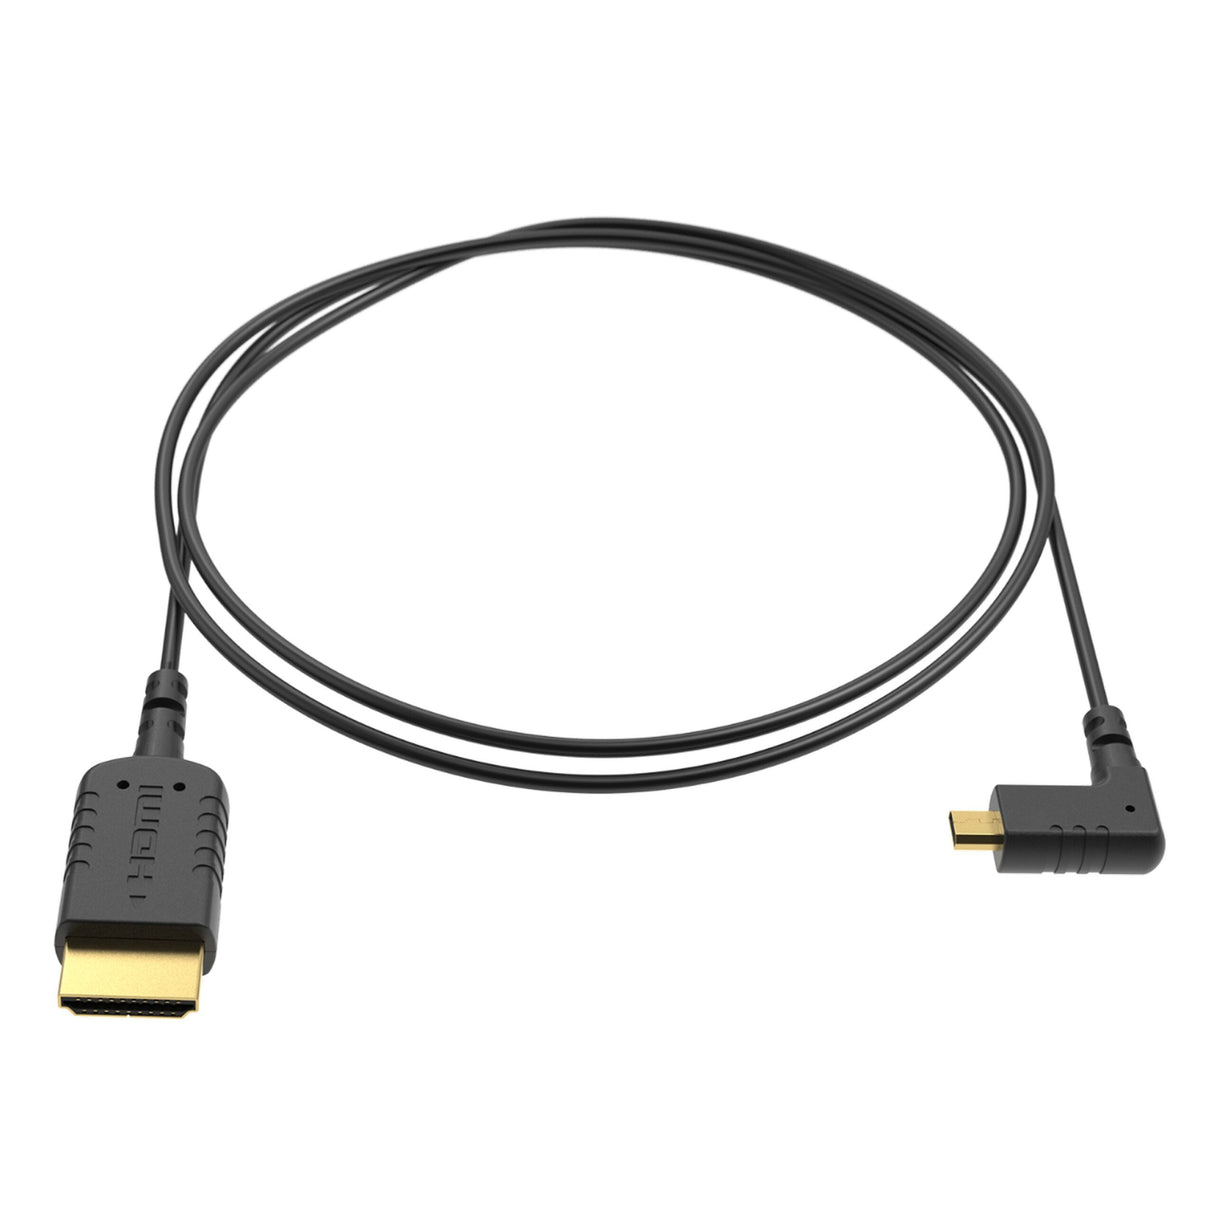 8Sinn eXtraThin Angled HDMI Micro to HDMI Cable, 40 Centimeters